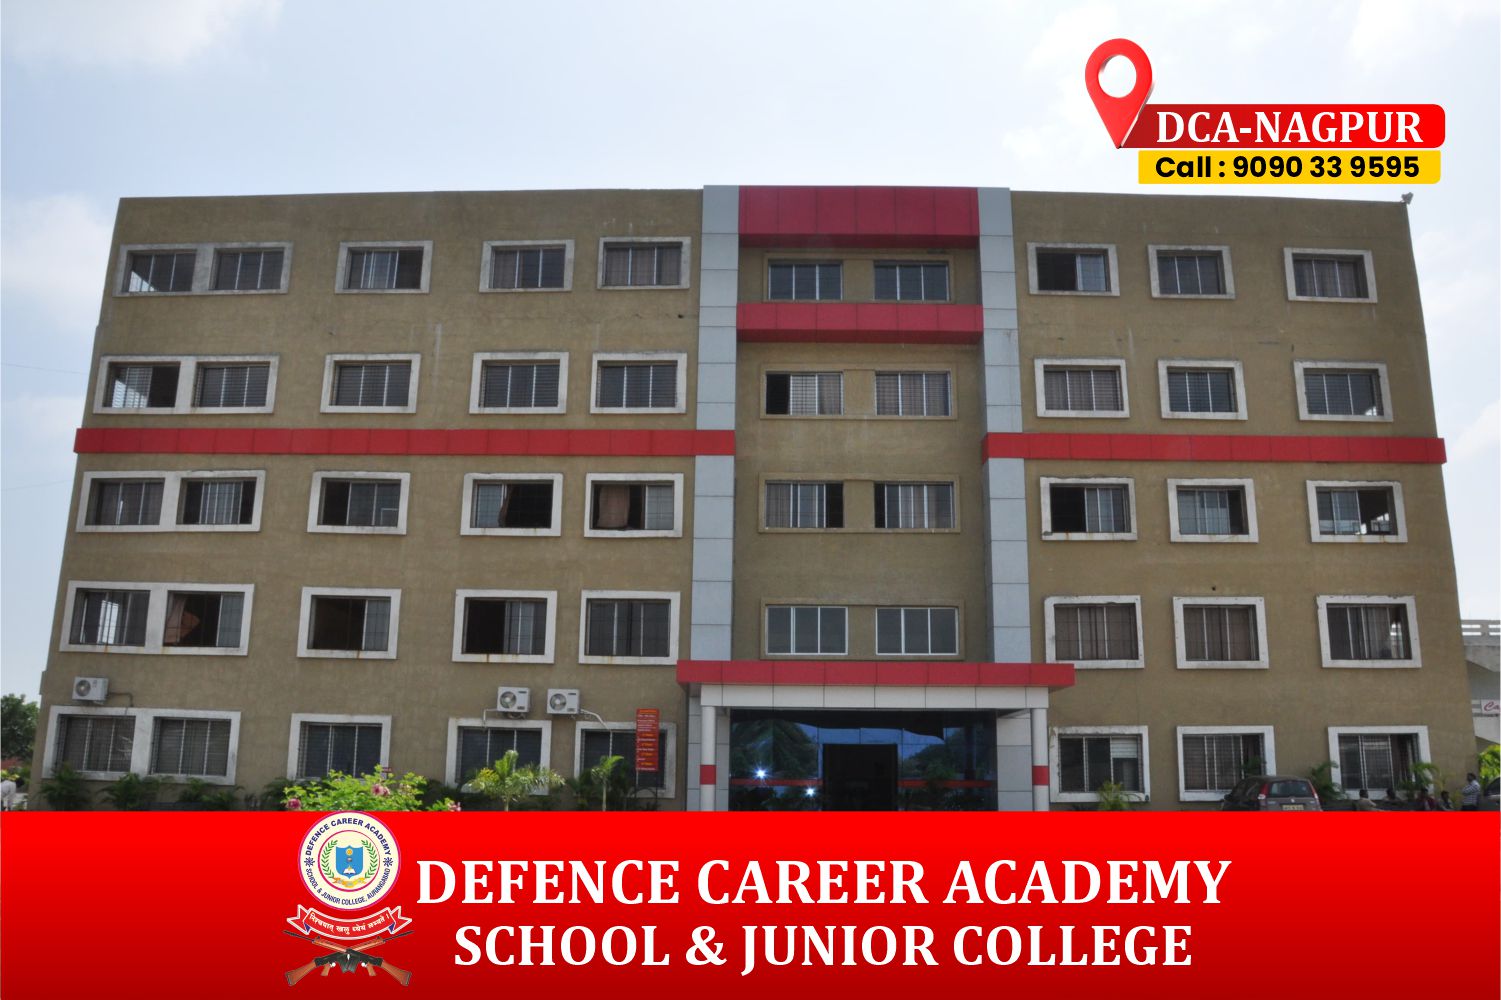 Top defence career academy in Nagpur